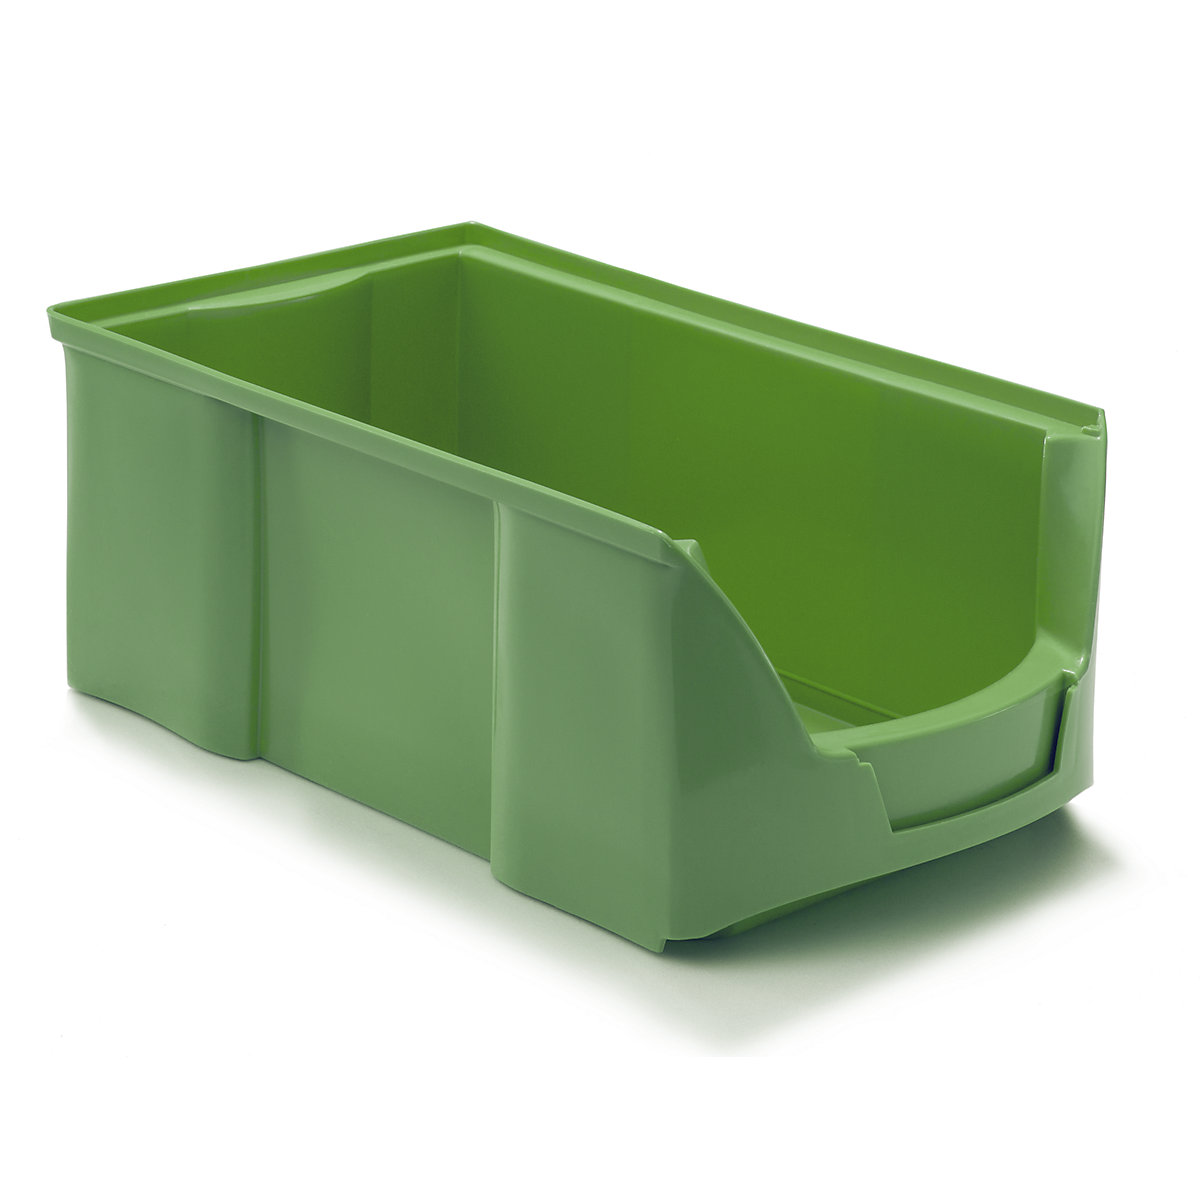 FUTURA open fronted storage bin made of polyethylene, LxWxH 360 x 208 x 147 mm, pack of 12, green-15